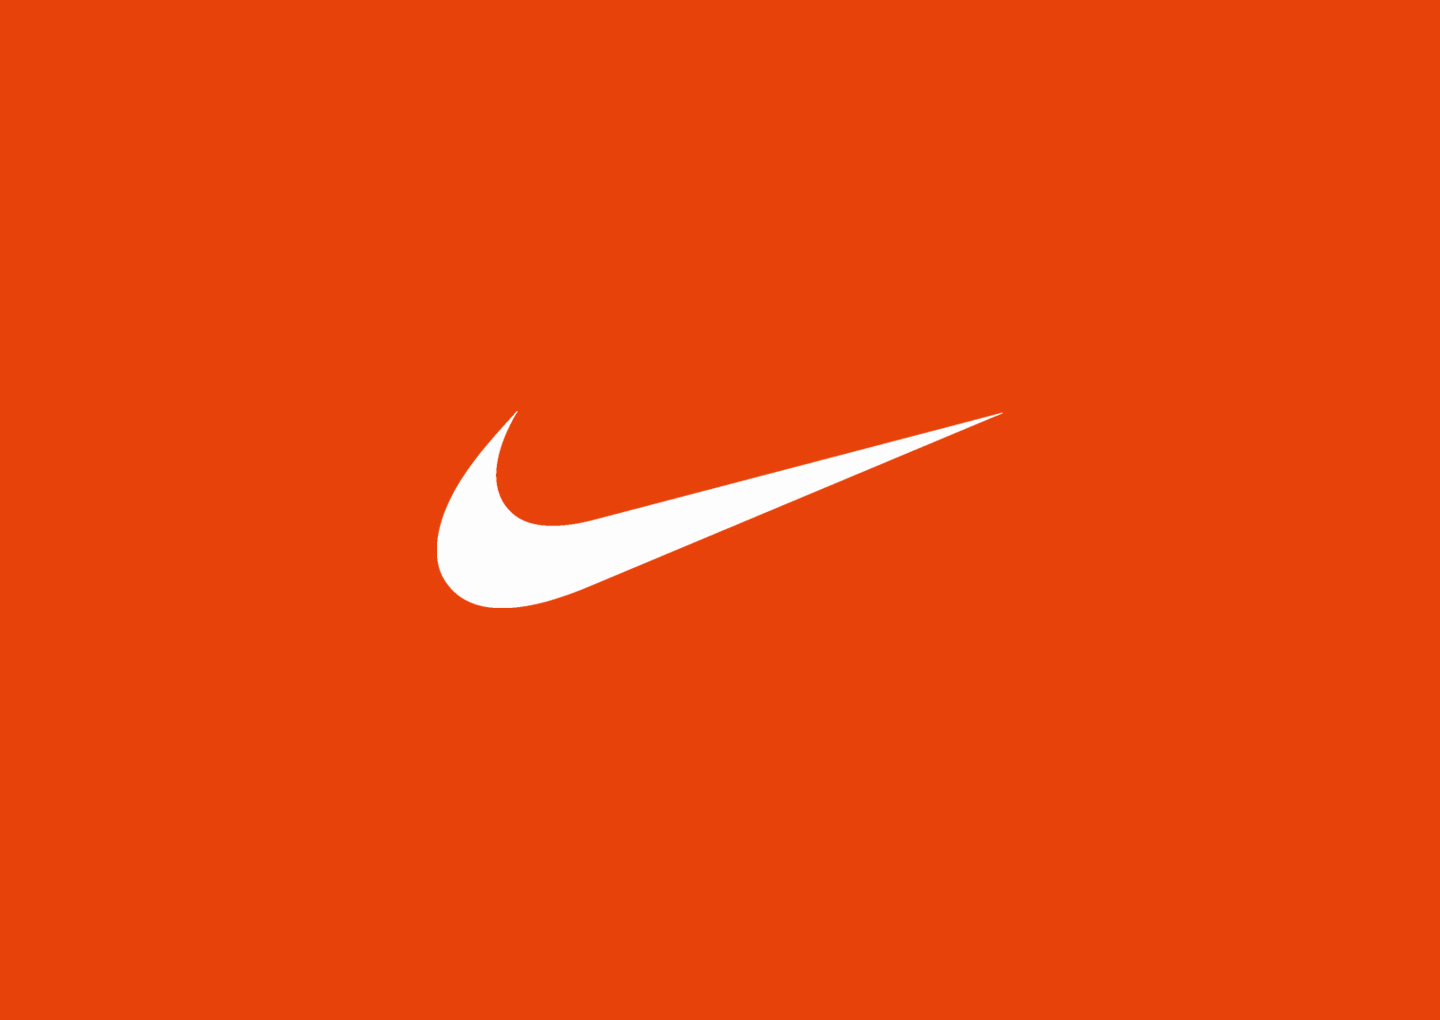 Nike News The Official News Website For Nike Inc